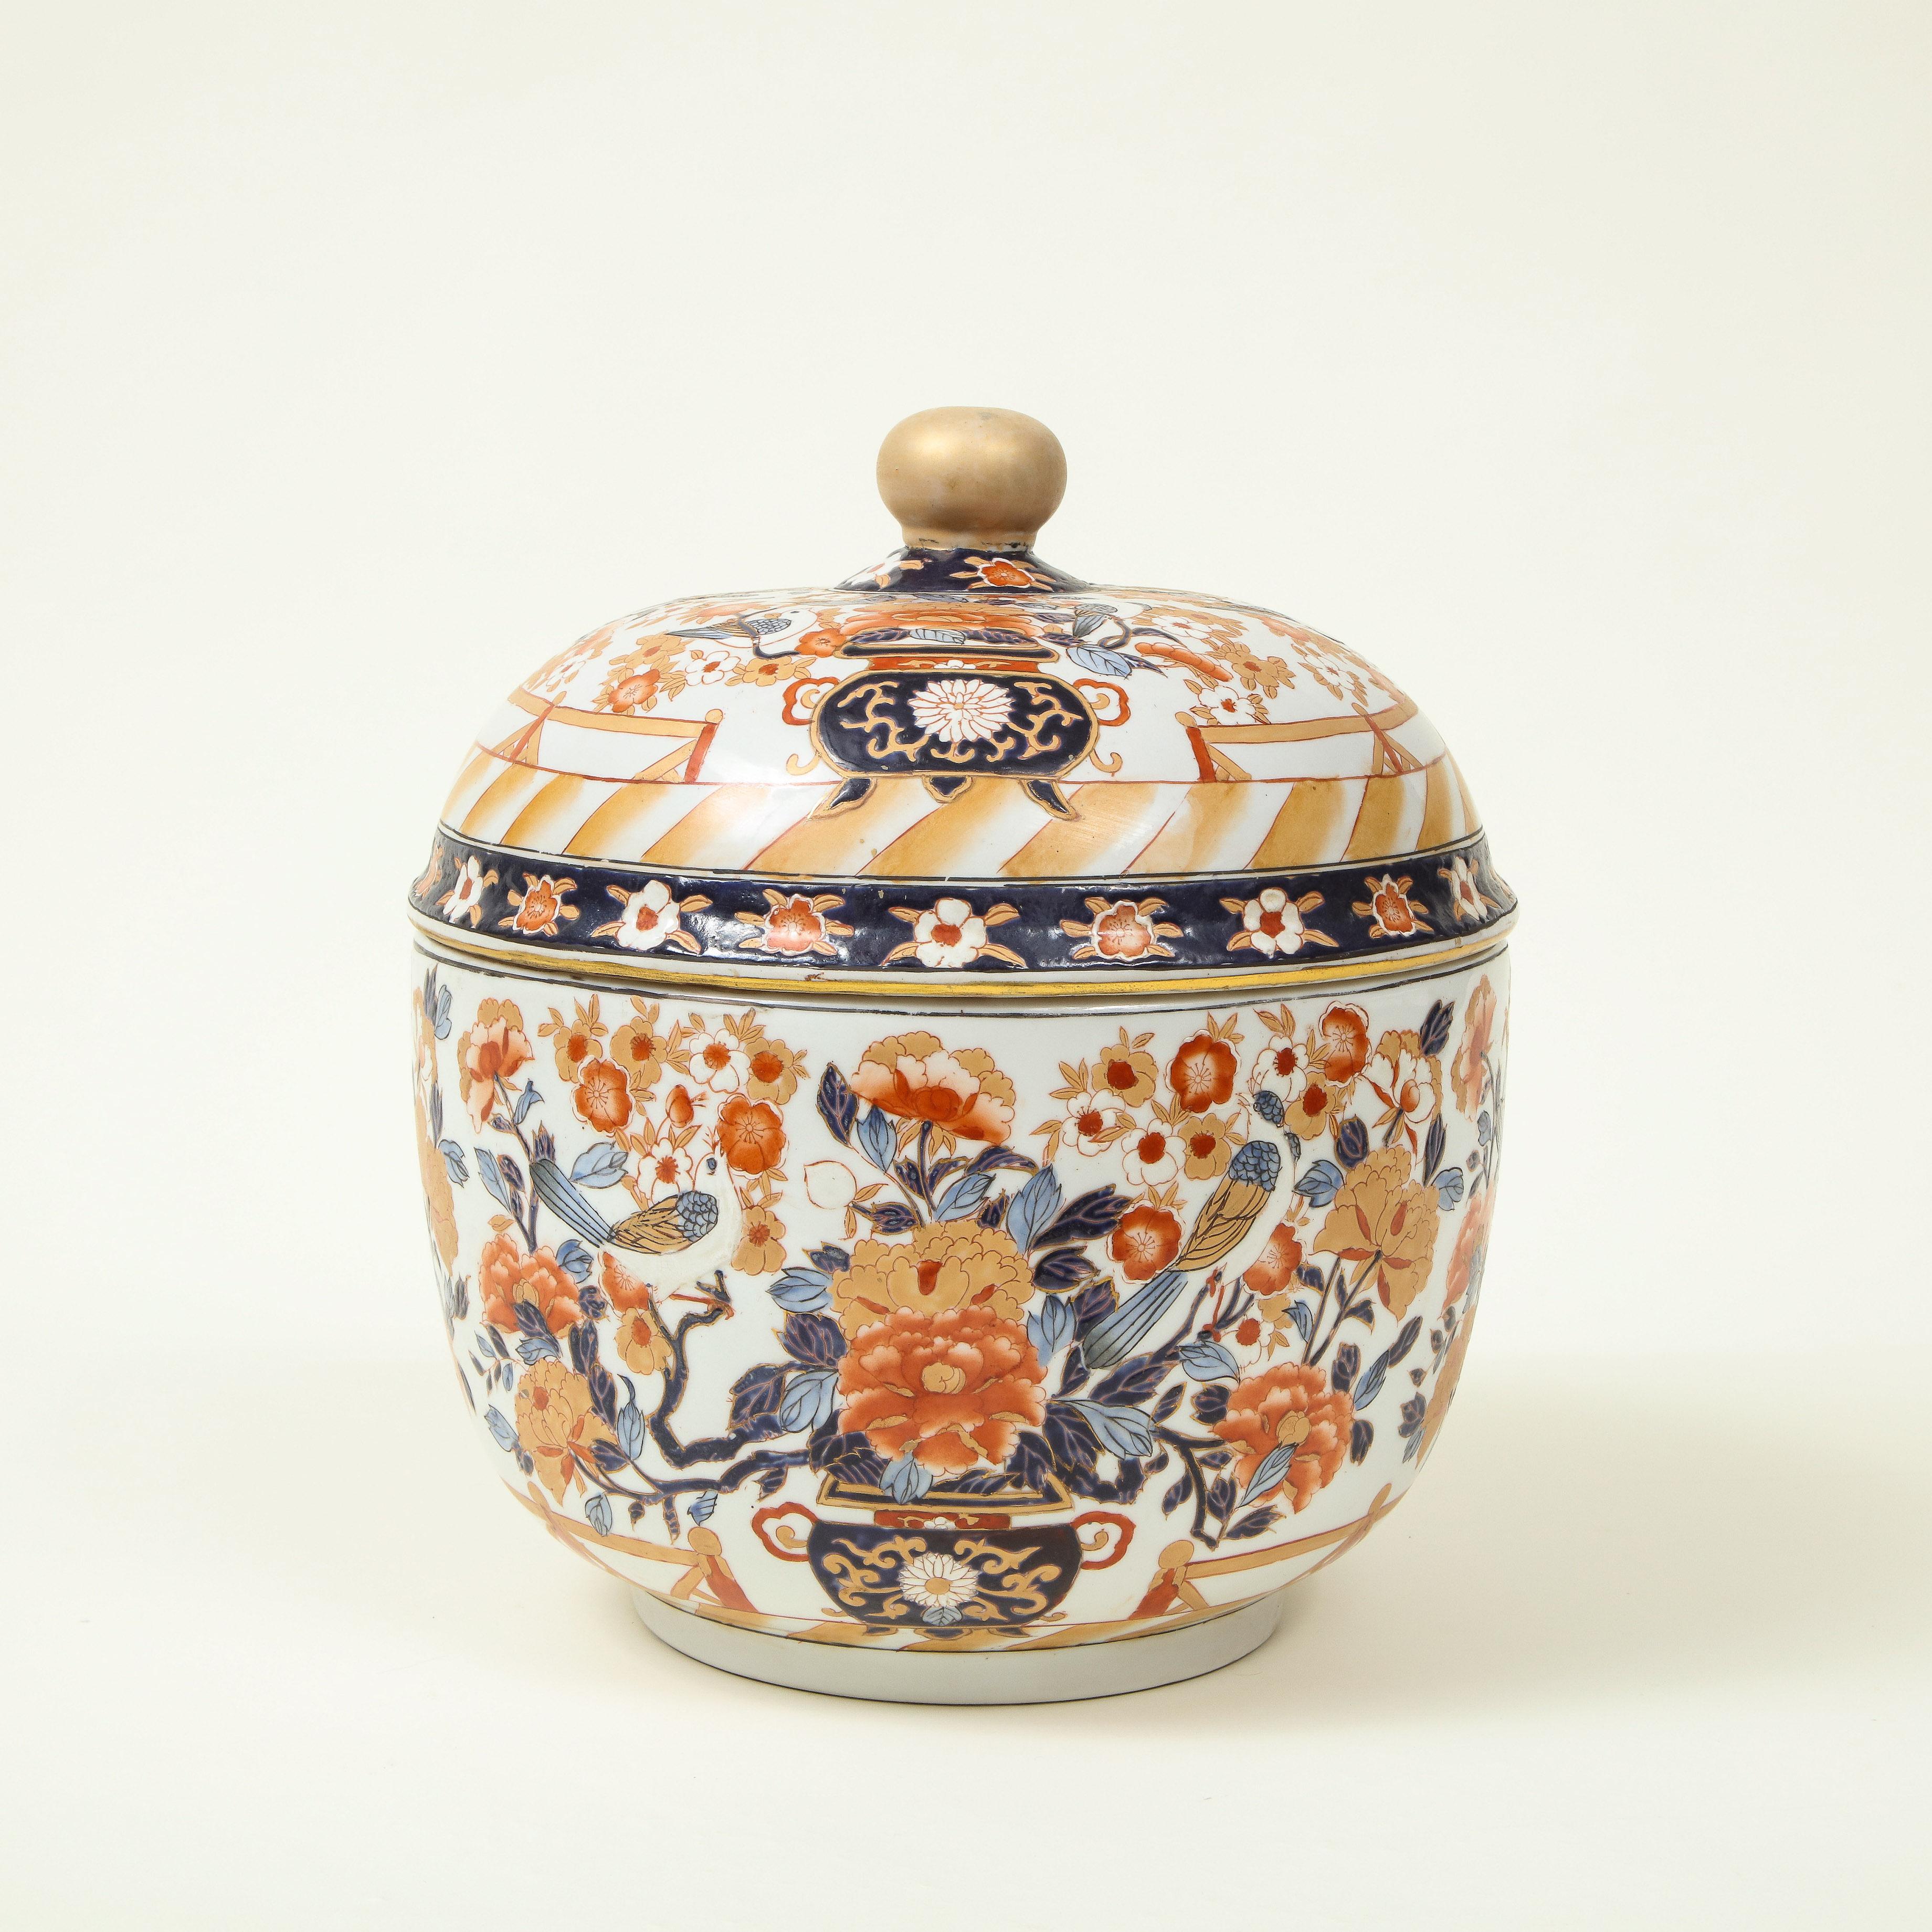 Of globular form with lid surmounted by a gilt ball finial; decorated in iron red and cobalt blue with vases filled with chrysanthemum, birds, and flowering cherry blossoms; With Chinese mark to underside.

Provenance: From the Collection of Mario